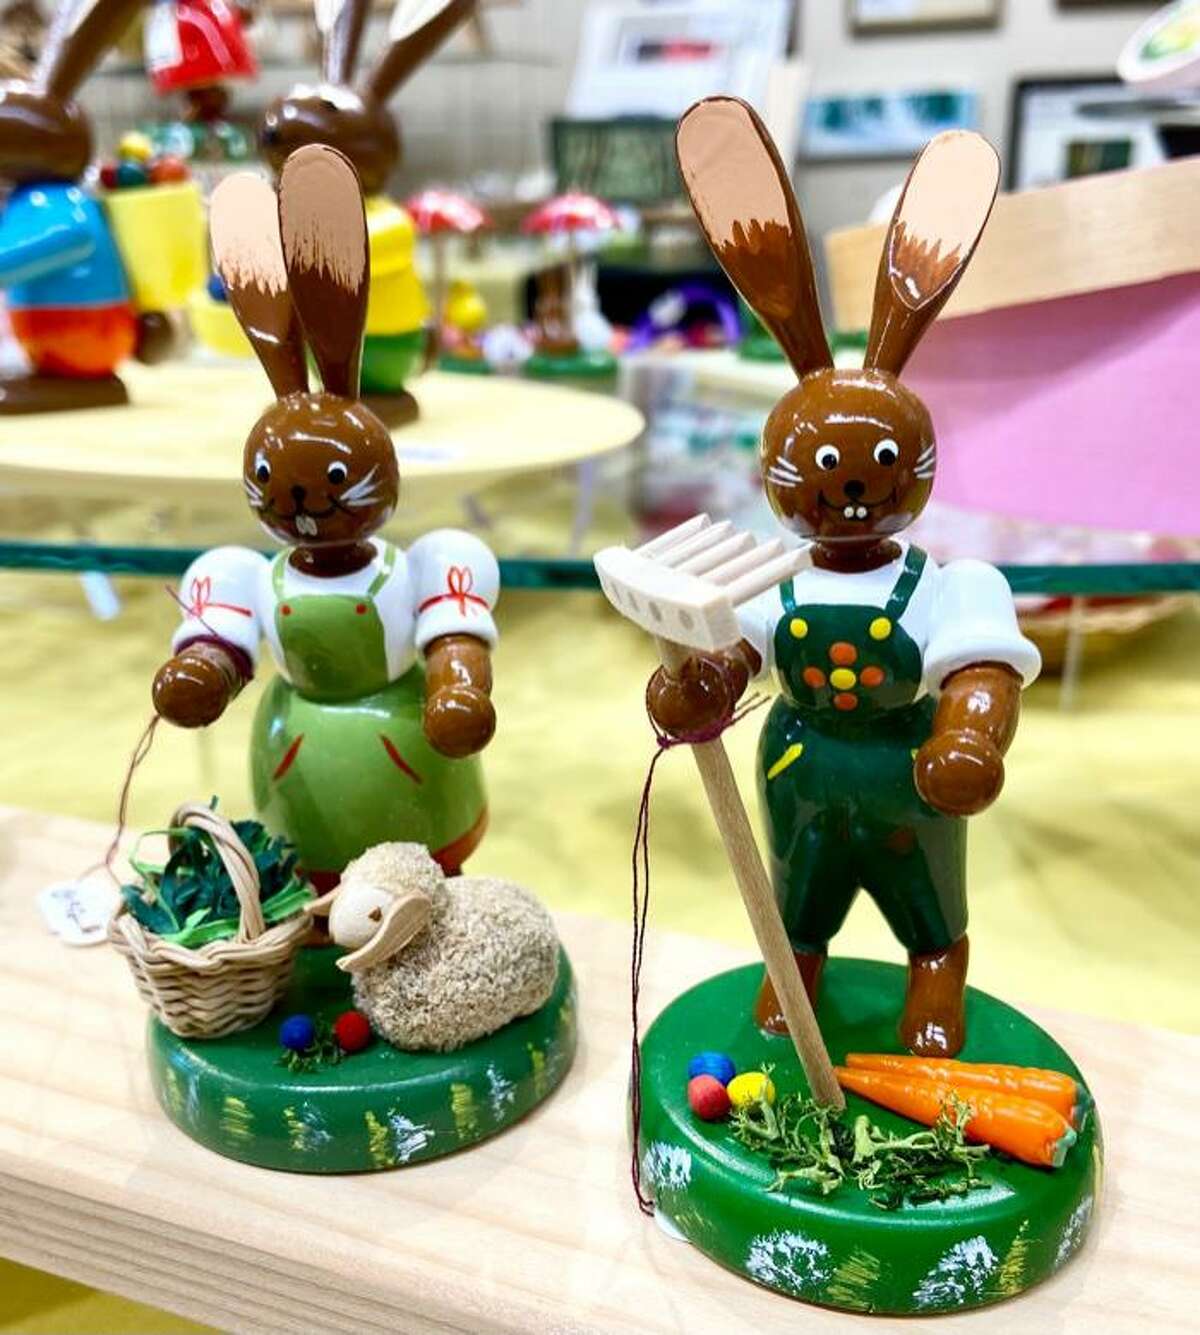 Ursel’s Web, at 140 Washington St. in Middletown, is hosting an opening reception of its 12th annual Easter show Friday from 10 a.m. to 8 p.m. and Saturday, 10 a.m. to 5 p.m.